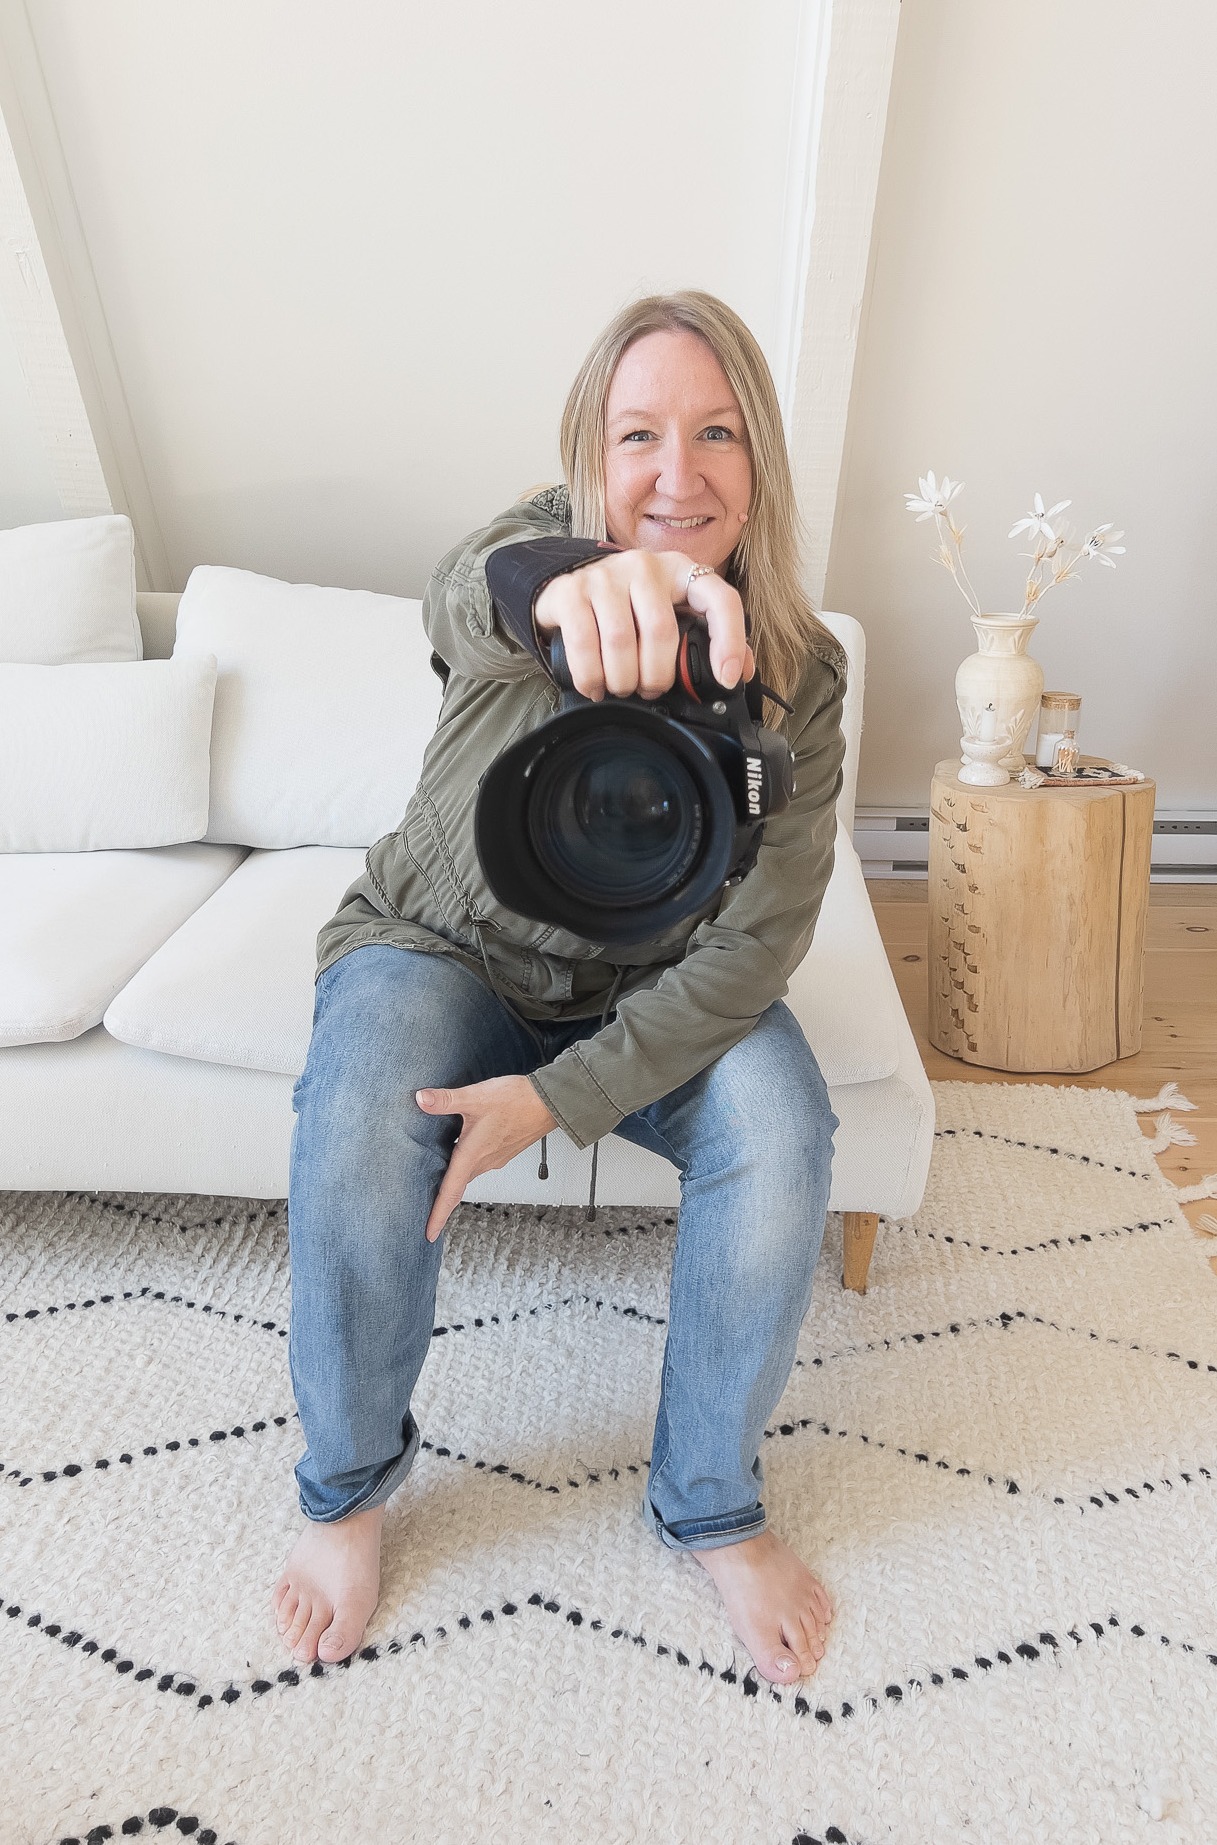 female photographer with blond hair, wearing olive green jacket and blue jeans, sitting on white sofa, holding out camera with large lens